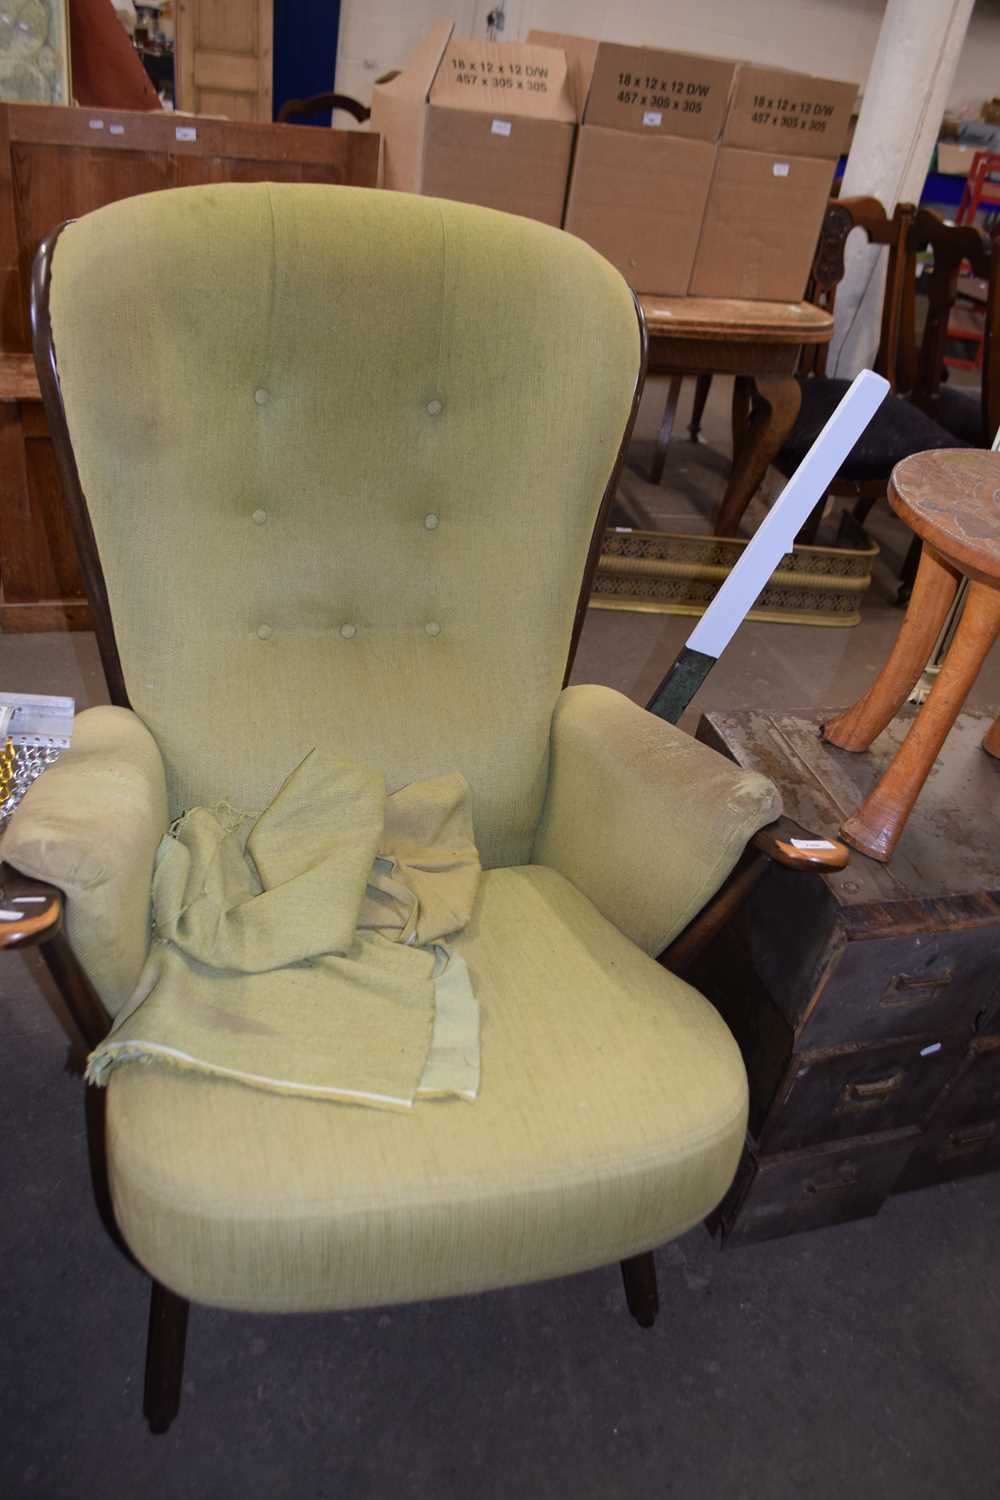 An olive green upholstered easy chair